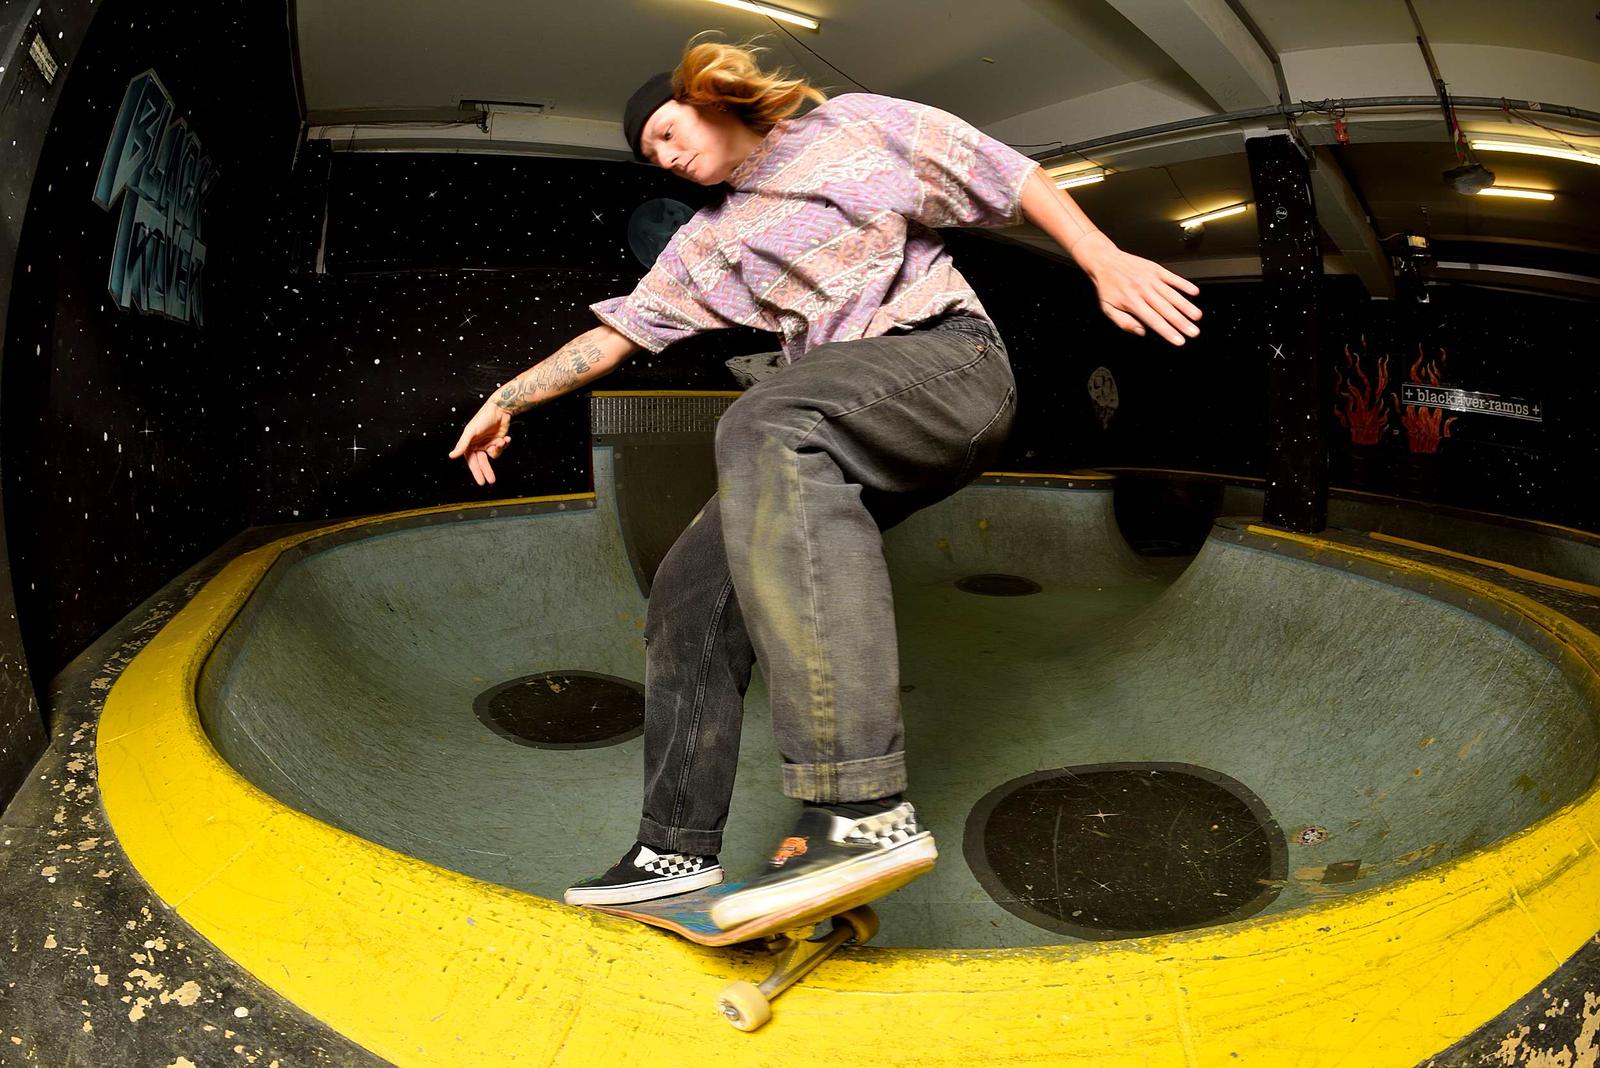 BUILDING A PROFESSIONAL SKATE CAREER WITH CANDY - Jenkem Magazine